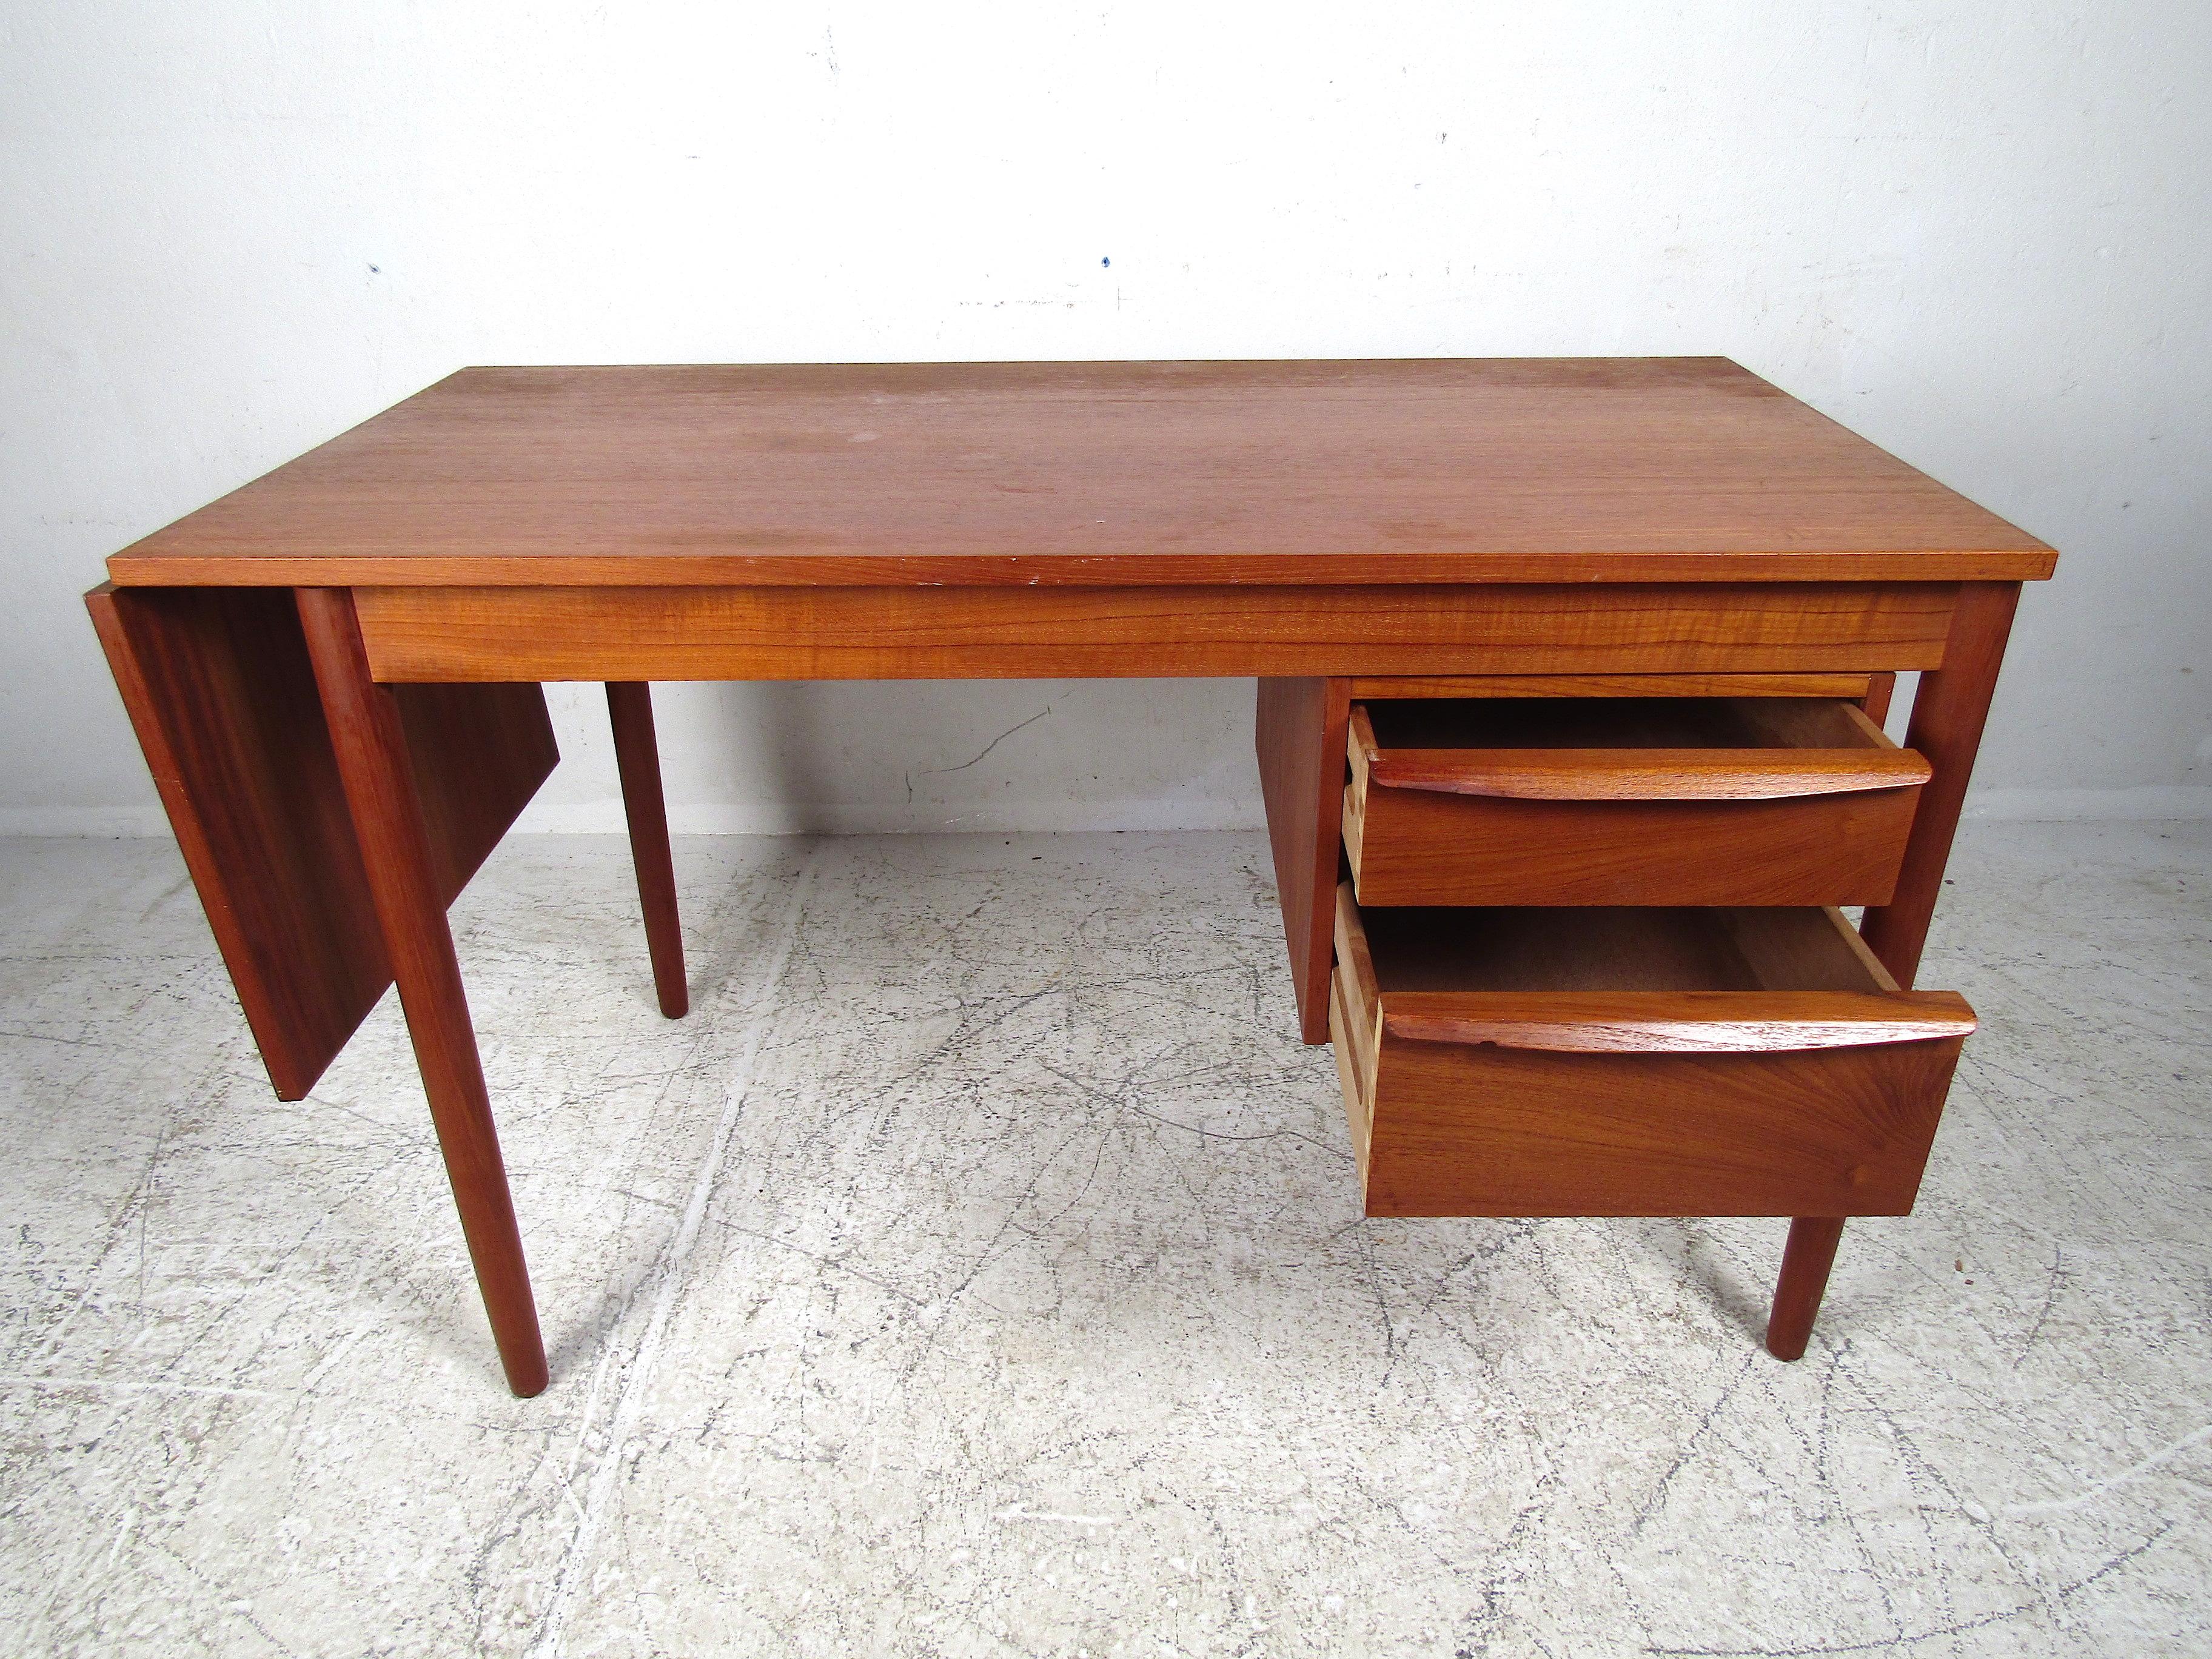 Very unusual Danish modern desk with a drop-leaf extension on the side. When extended, the entirety of the desktop slides across the base making a centered work surface. Nice teak finish throughout. Two dovetail-jointed drawers for storage. Tapered